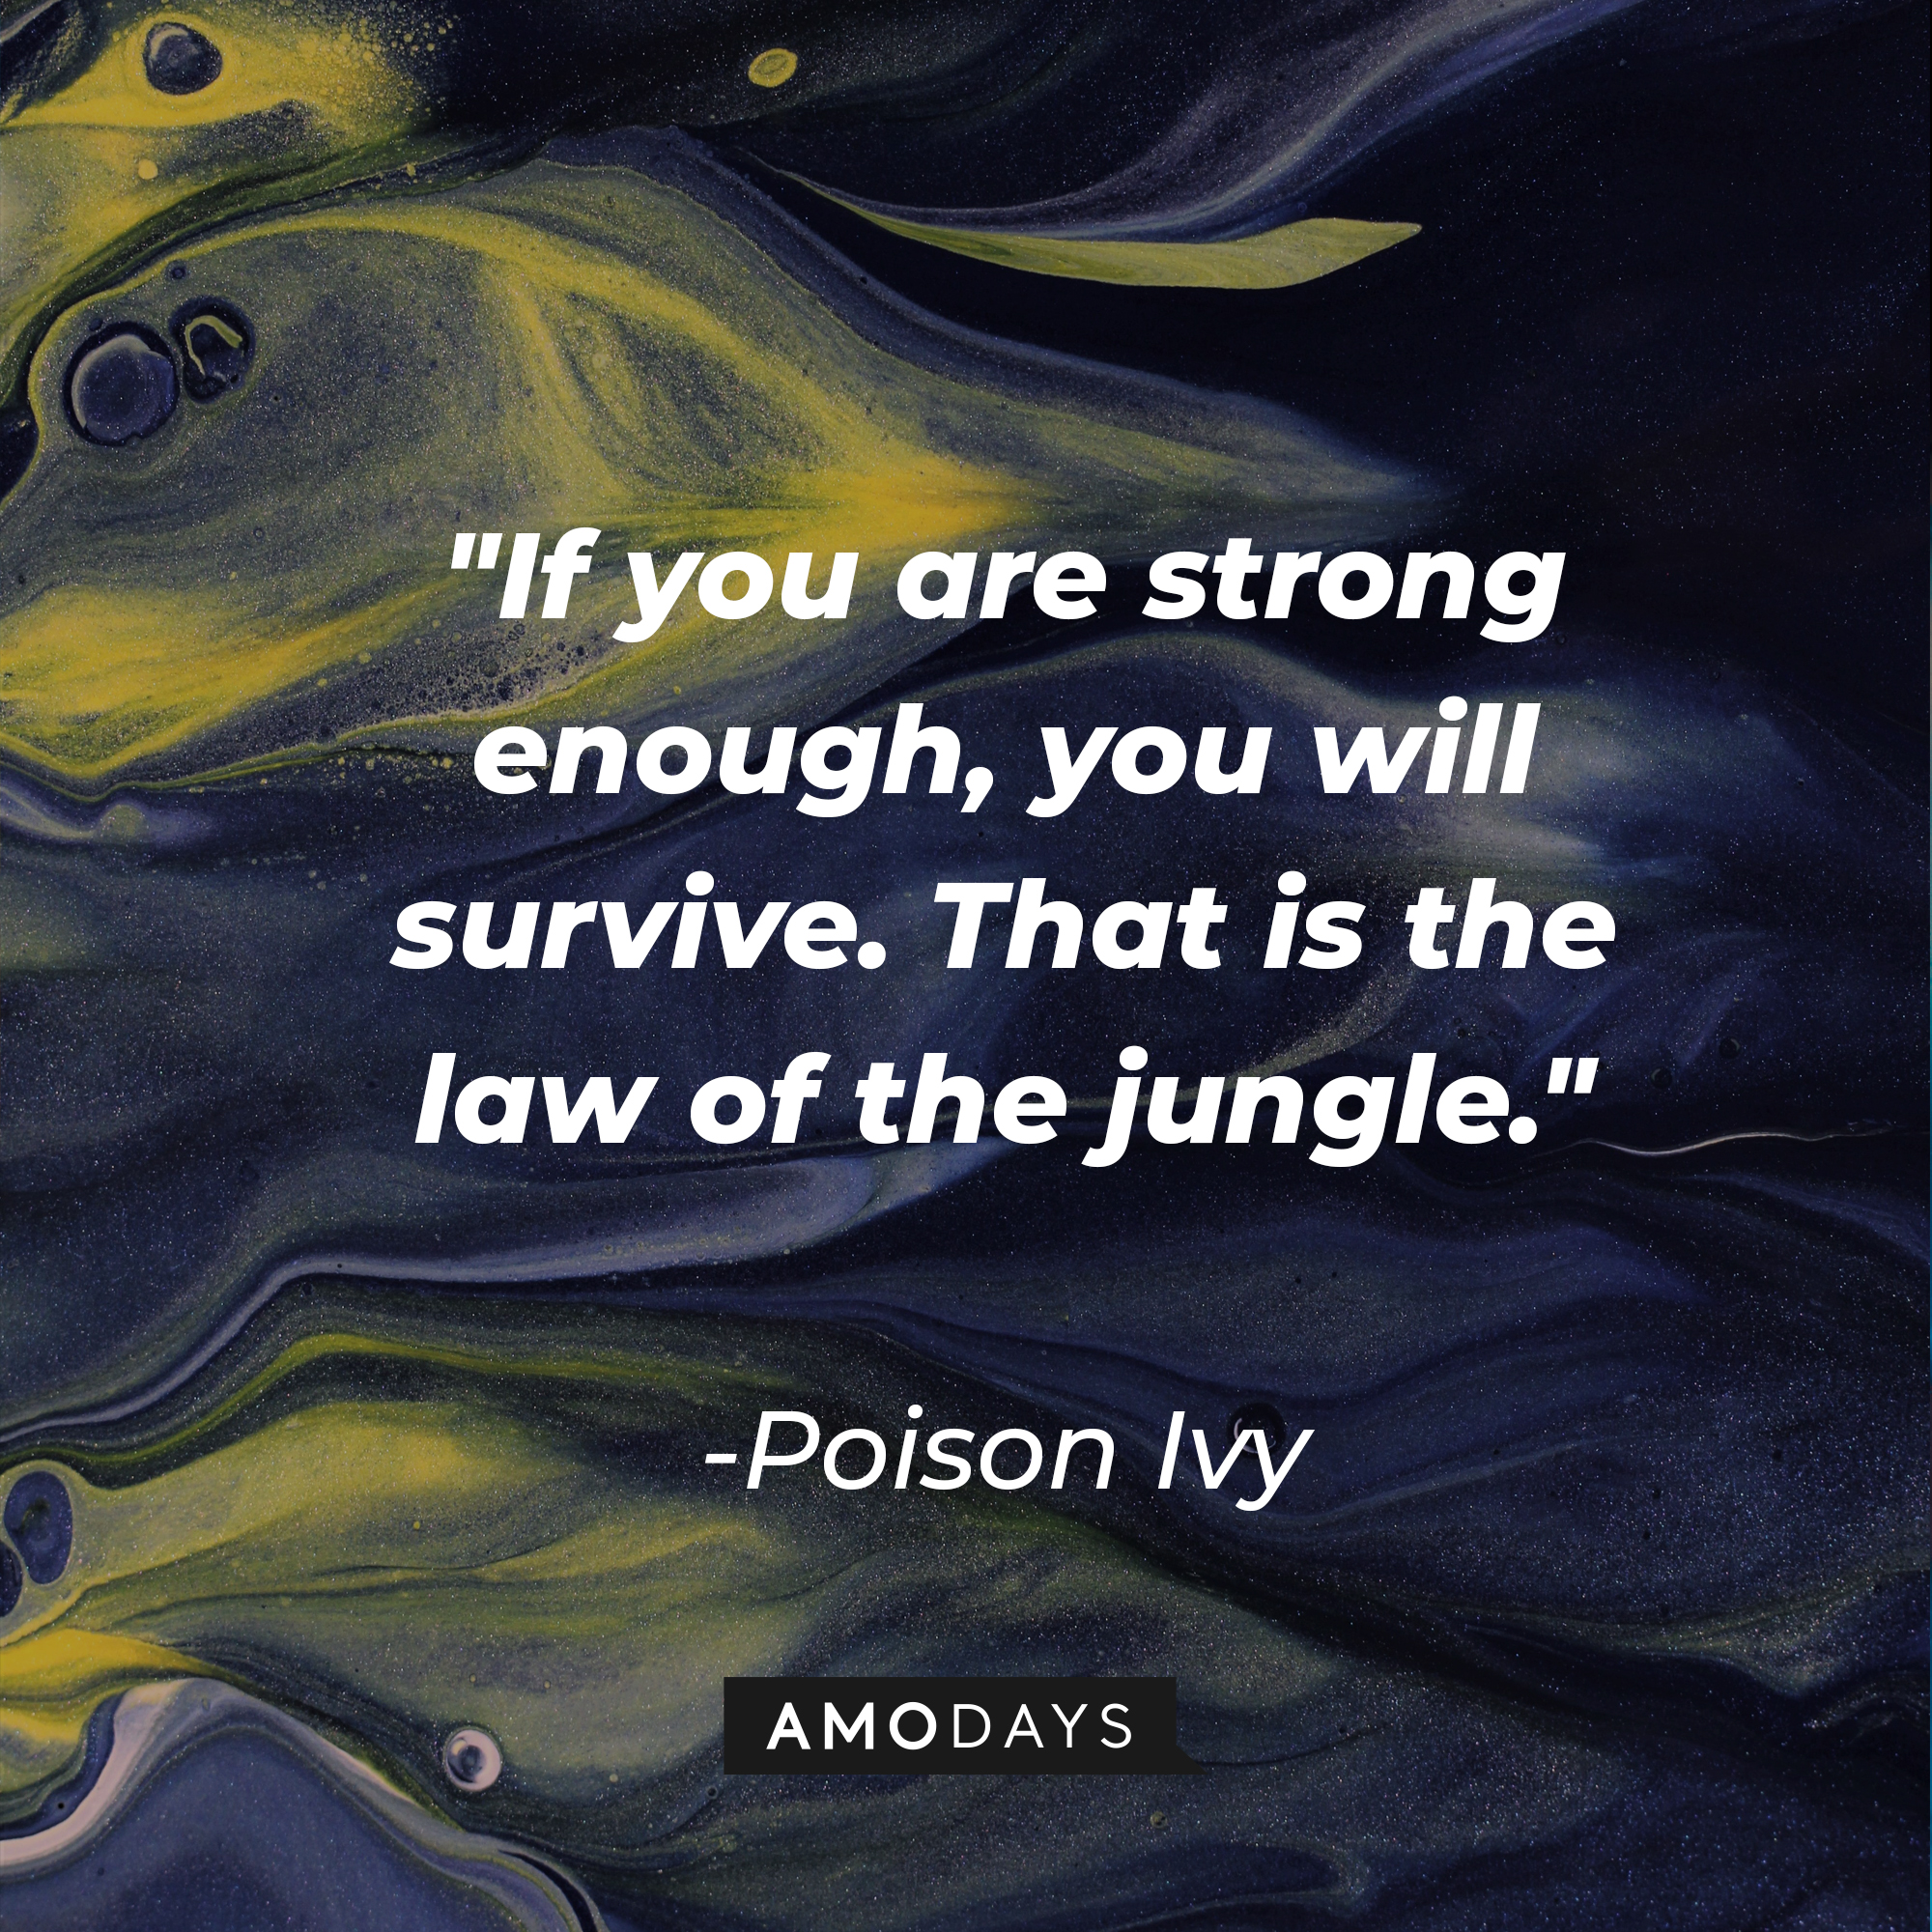 Poison Ivy’s quote: "If you are strong enough, you will survive. That is the law of the jungle." | Image: Unsplash